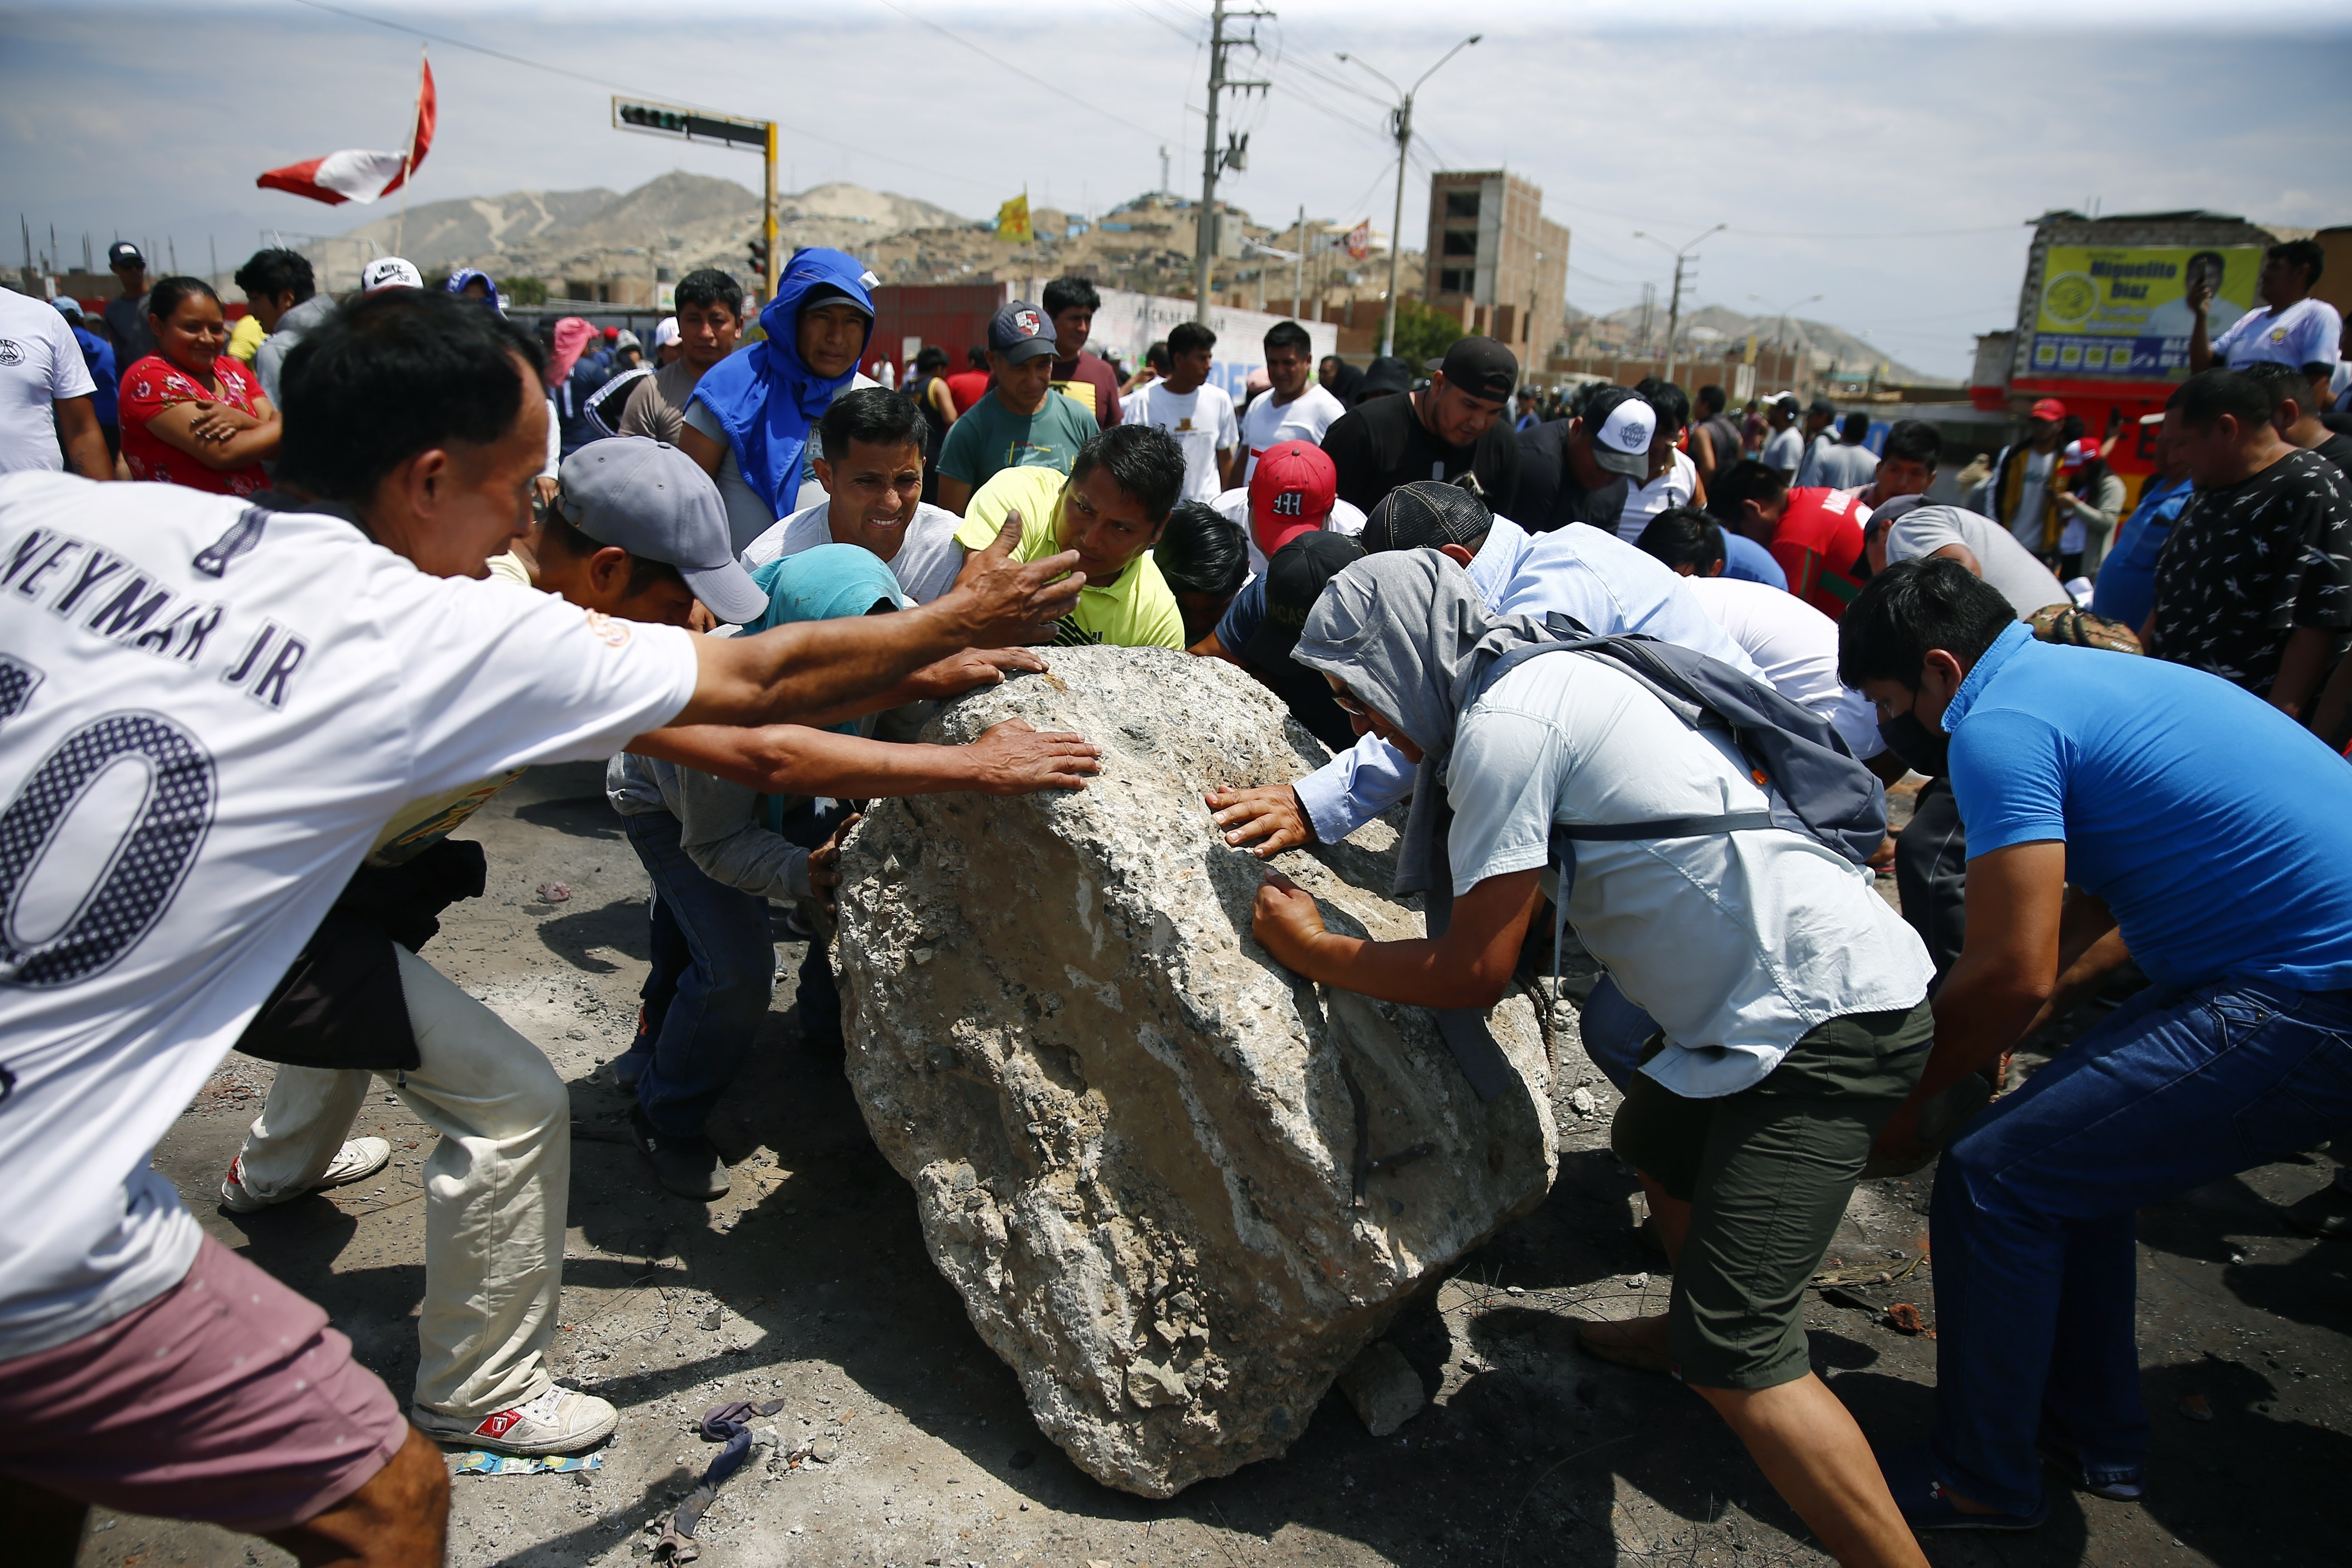 Supporters of ousted Peruvian President Pedro Castillo work together to roll a boulder onto the Pan-American North Highway during a protest against his detention, in Chao, Peru, Thursday, Dec. 15, 2022. Peru's new government declared a 30-day national emergency on Wednesday amid violent protests following Castillo's ouster, suspending the rights of "personal security and freedom" across the Andean nation. (AP Photo/Hugo Curotto)